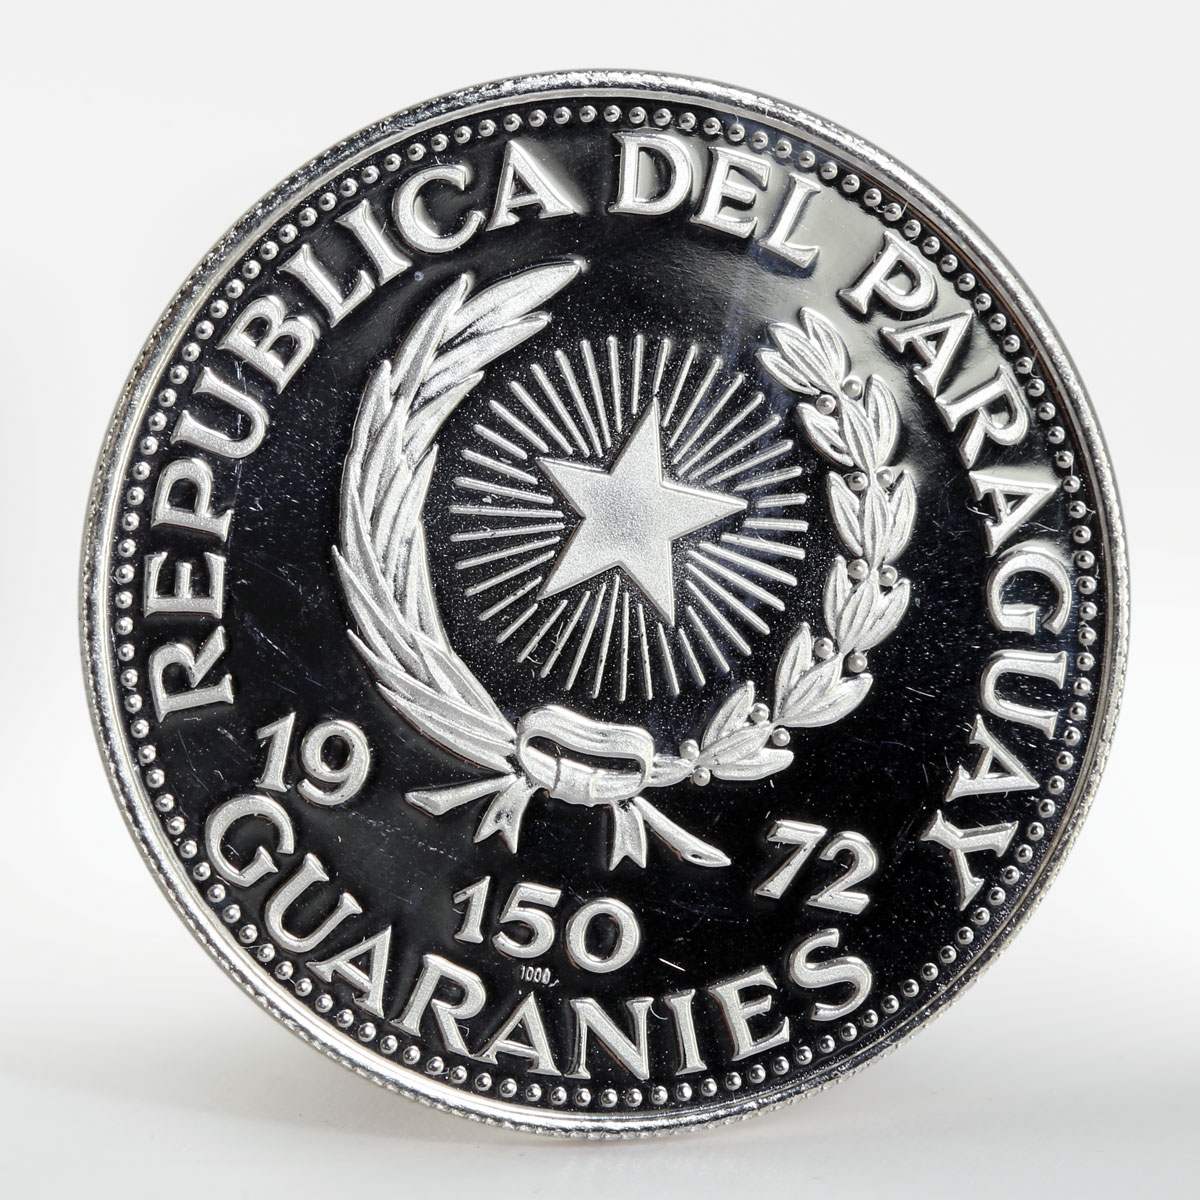 Paraguay 150 guaranies General Alfredo Stroessner arms silver coin 1972